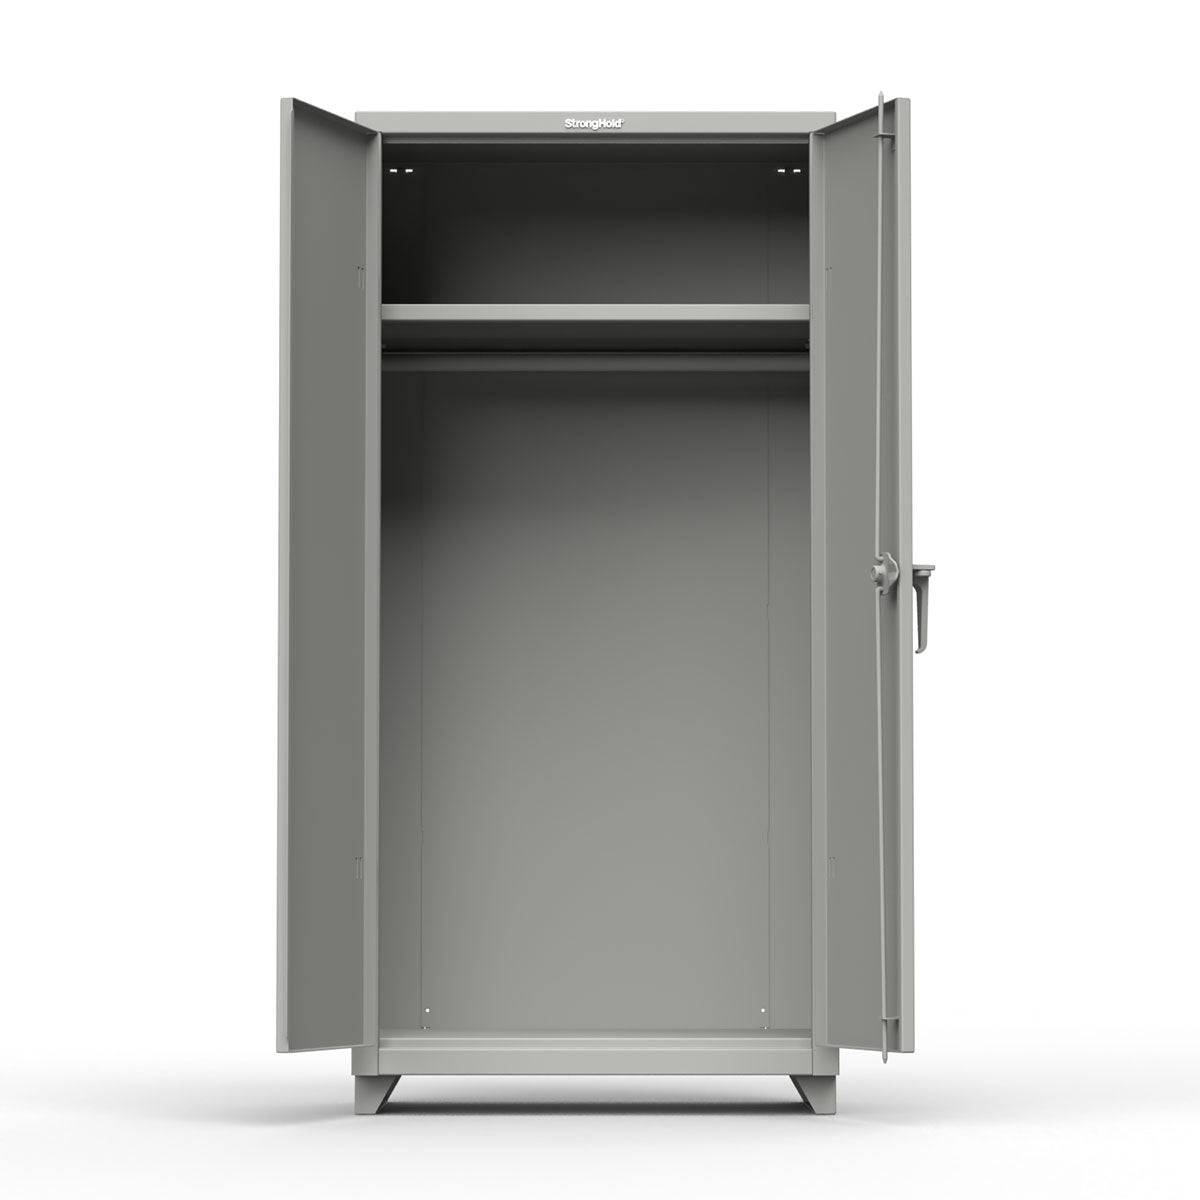 Extra Heavy Duty 14 GA Uniform Cabinet with Hanger Rod, 1 Shelf - 36 In. W x 24 In. D x 75 In. H - Strong Hold